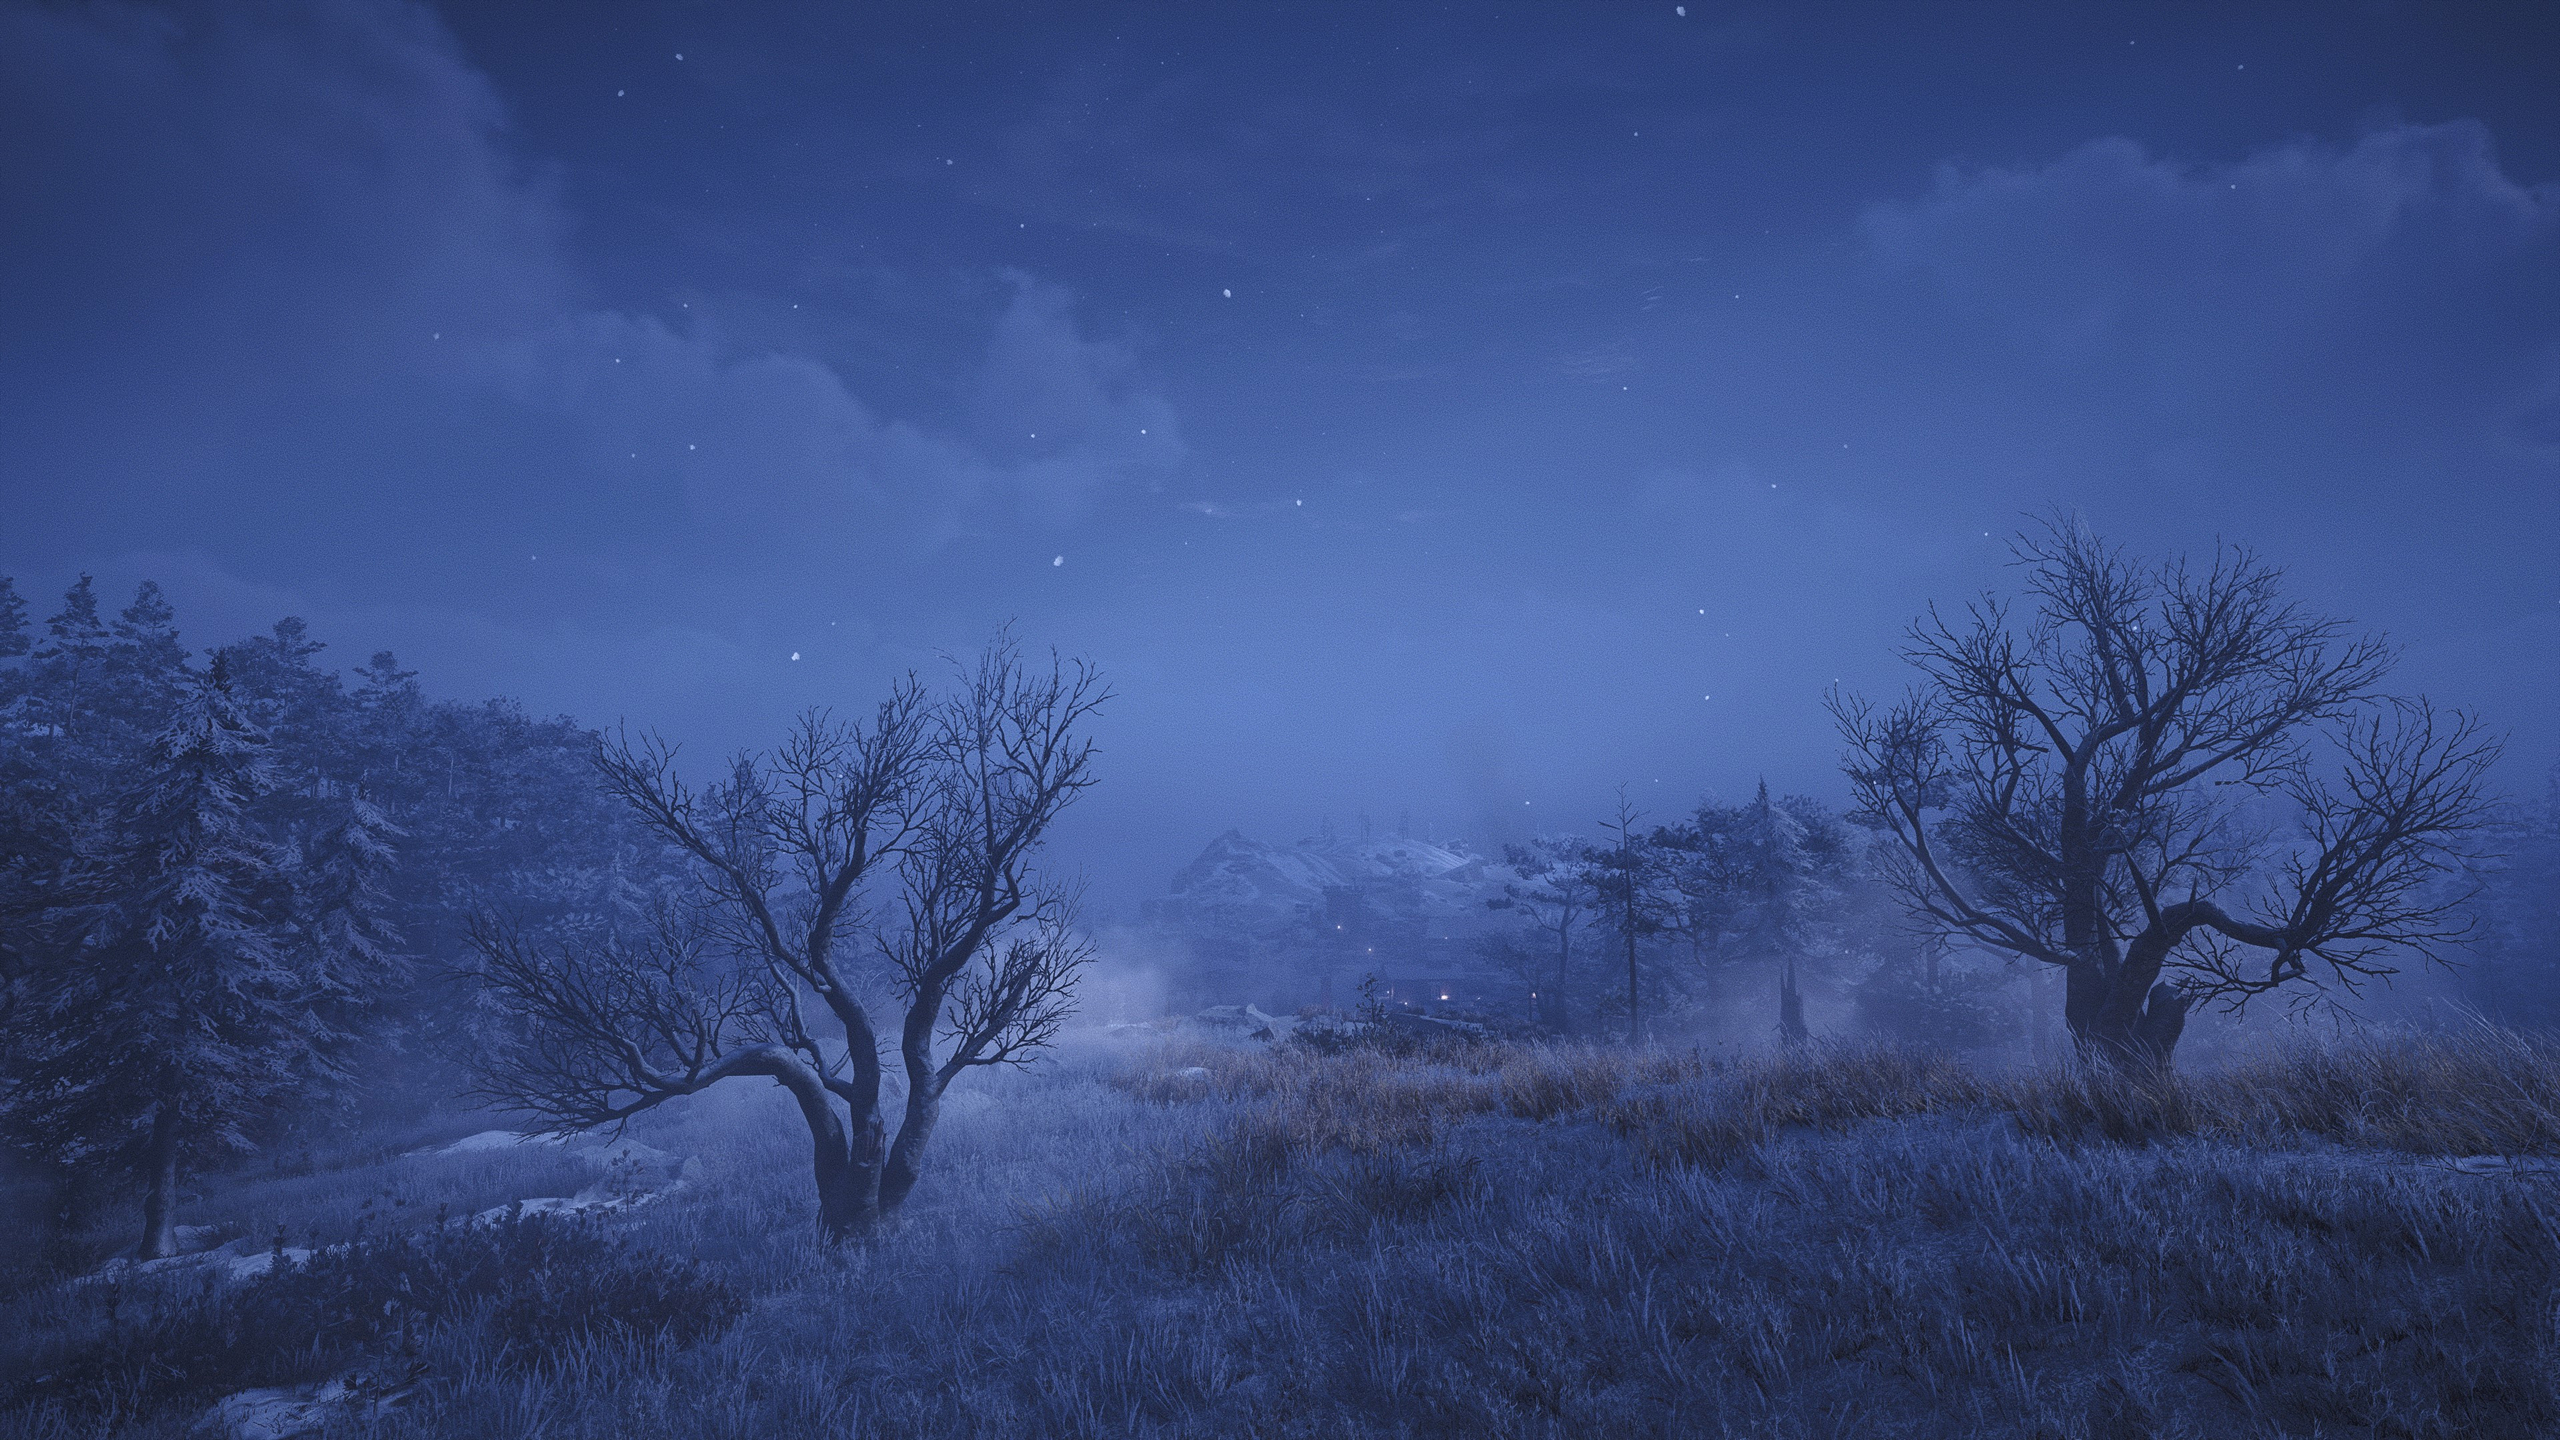 General 2560x1440 Assassin's Creed: Valhalla reshade HDR depth of field video games trees nature sky night stars